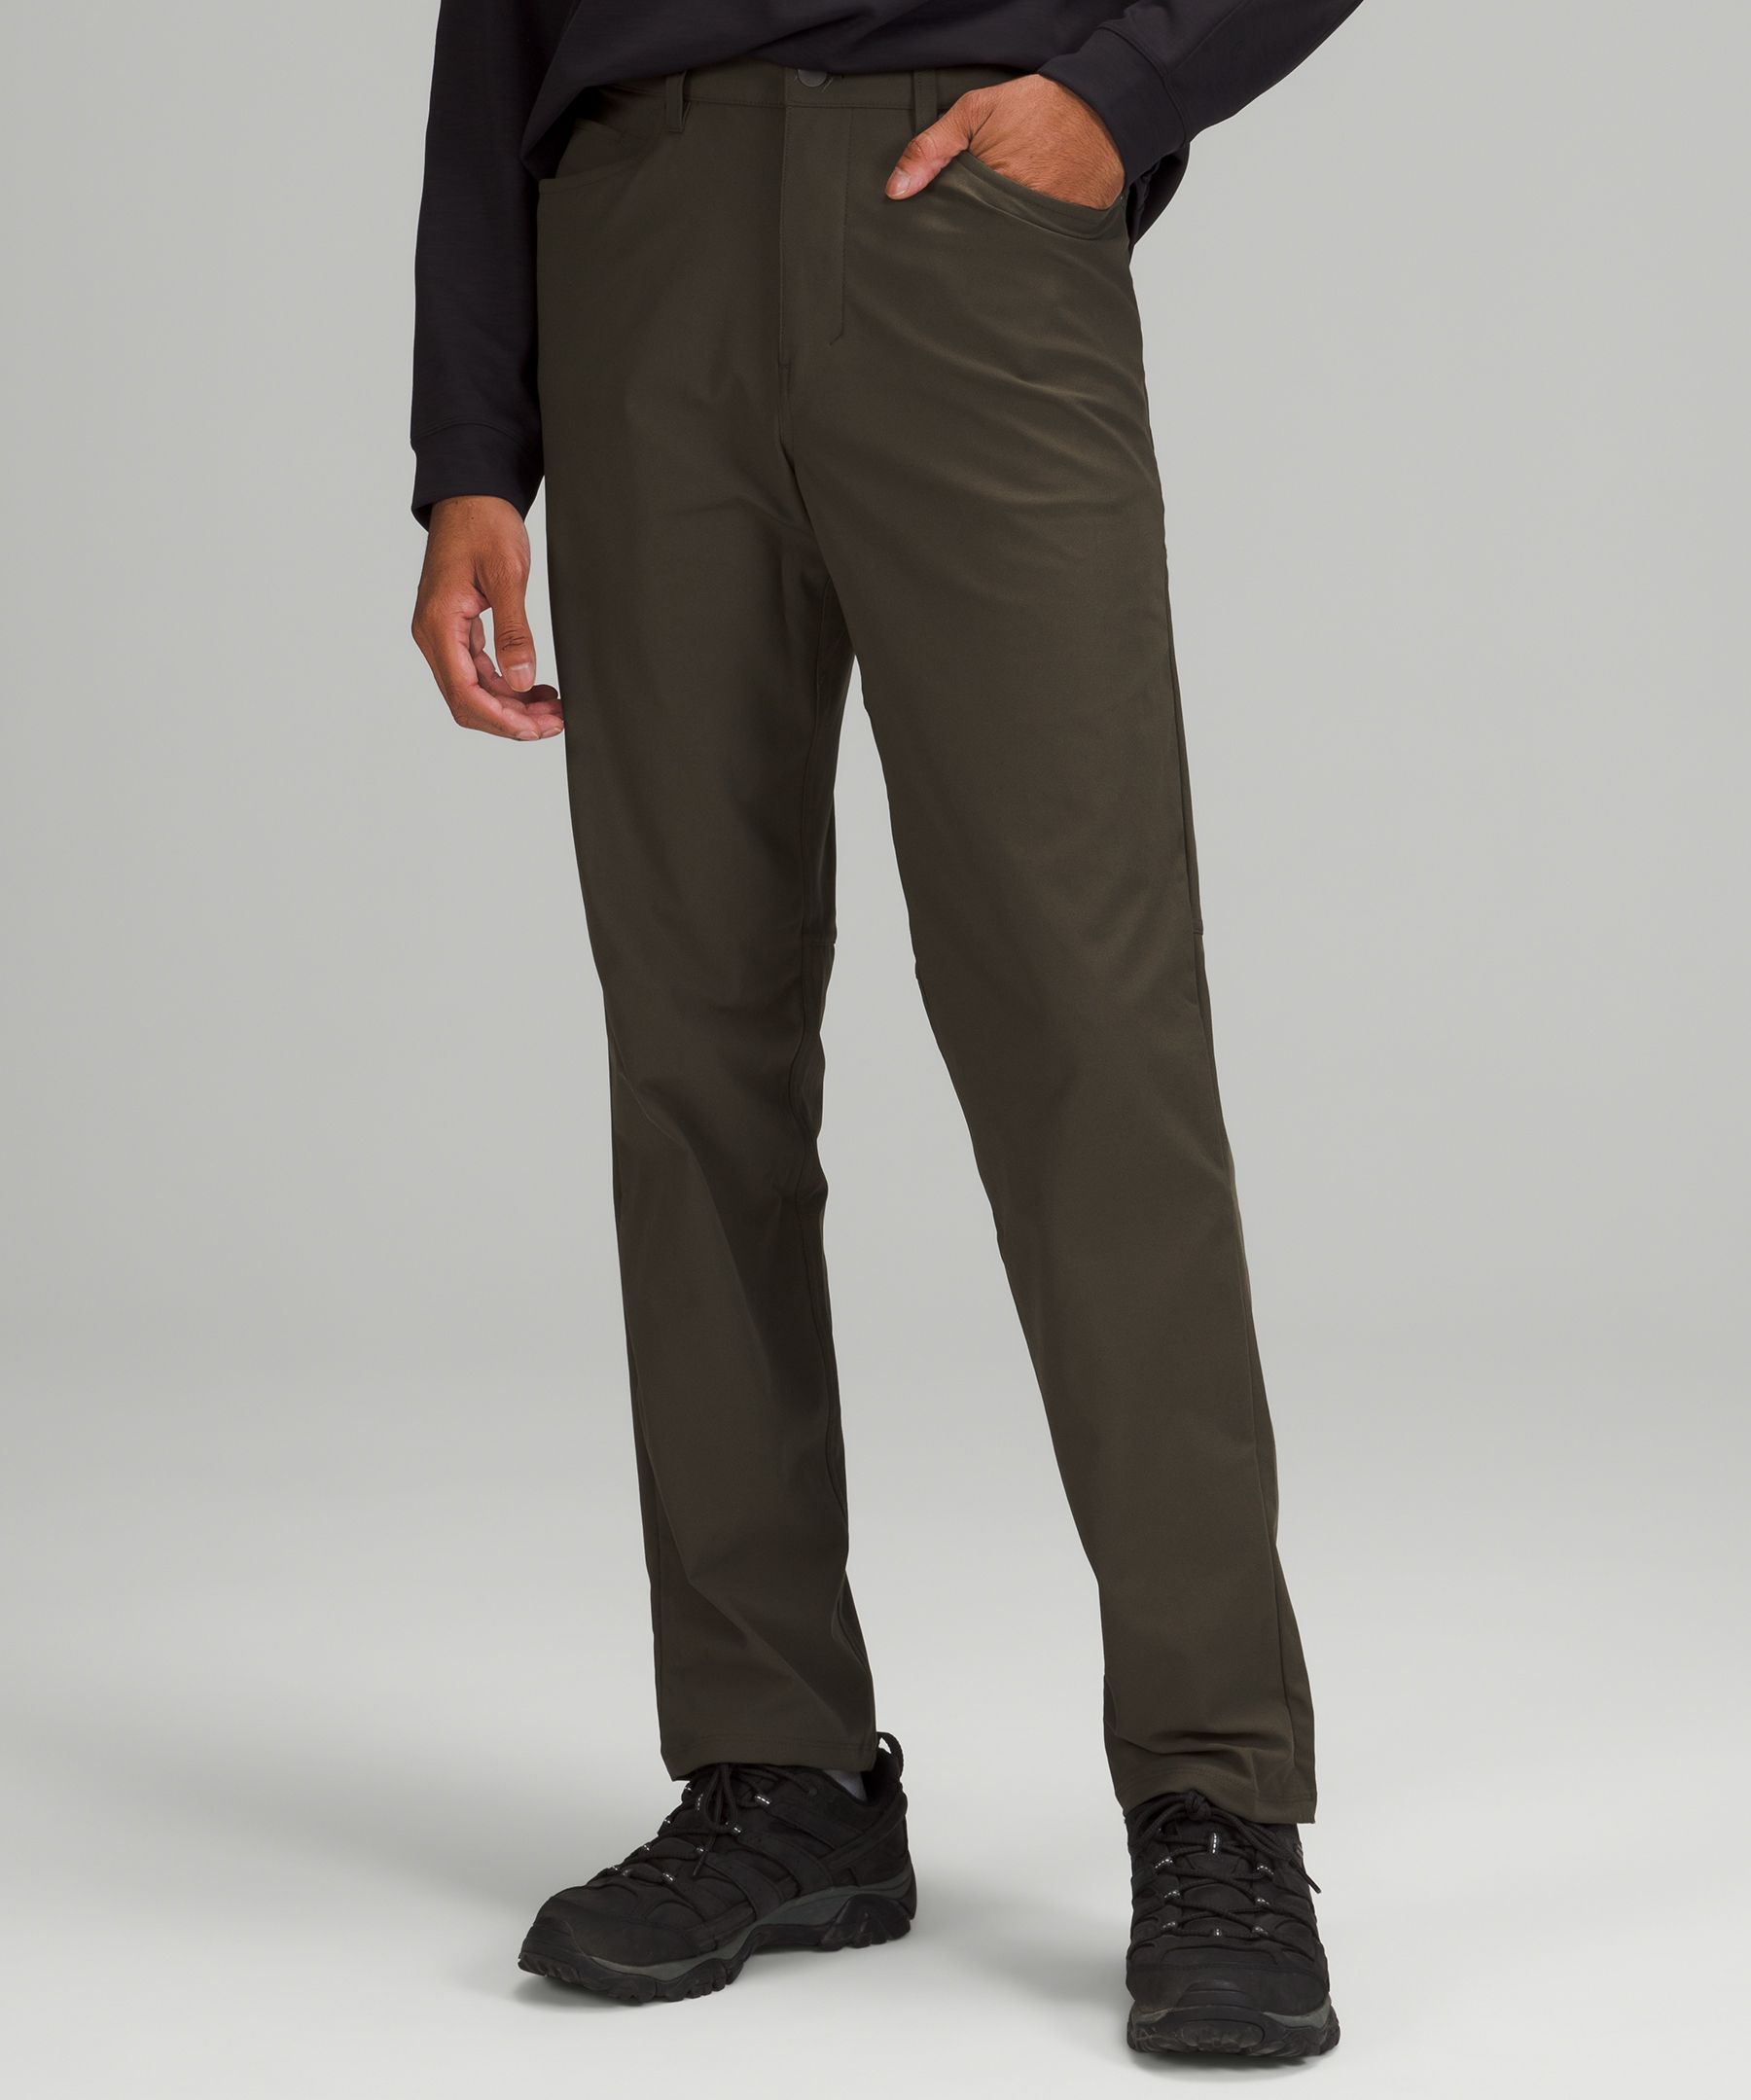 Lululemon Abc Relaxed-fit Pants 34" Warpstreme In Dark Olive